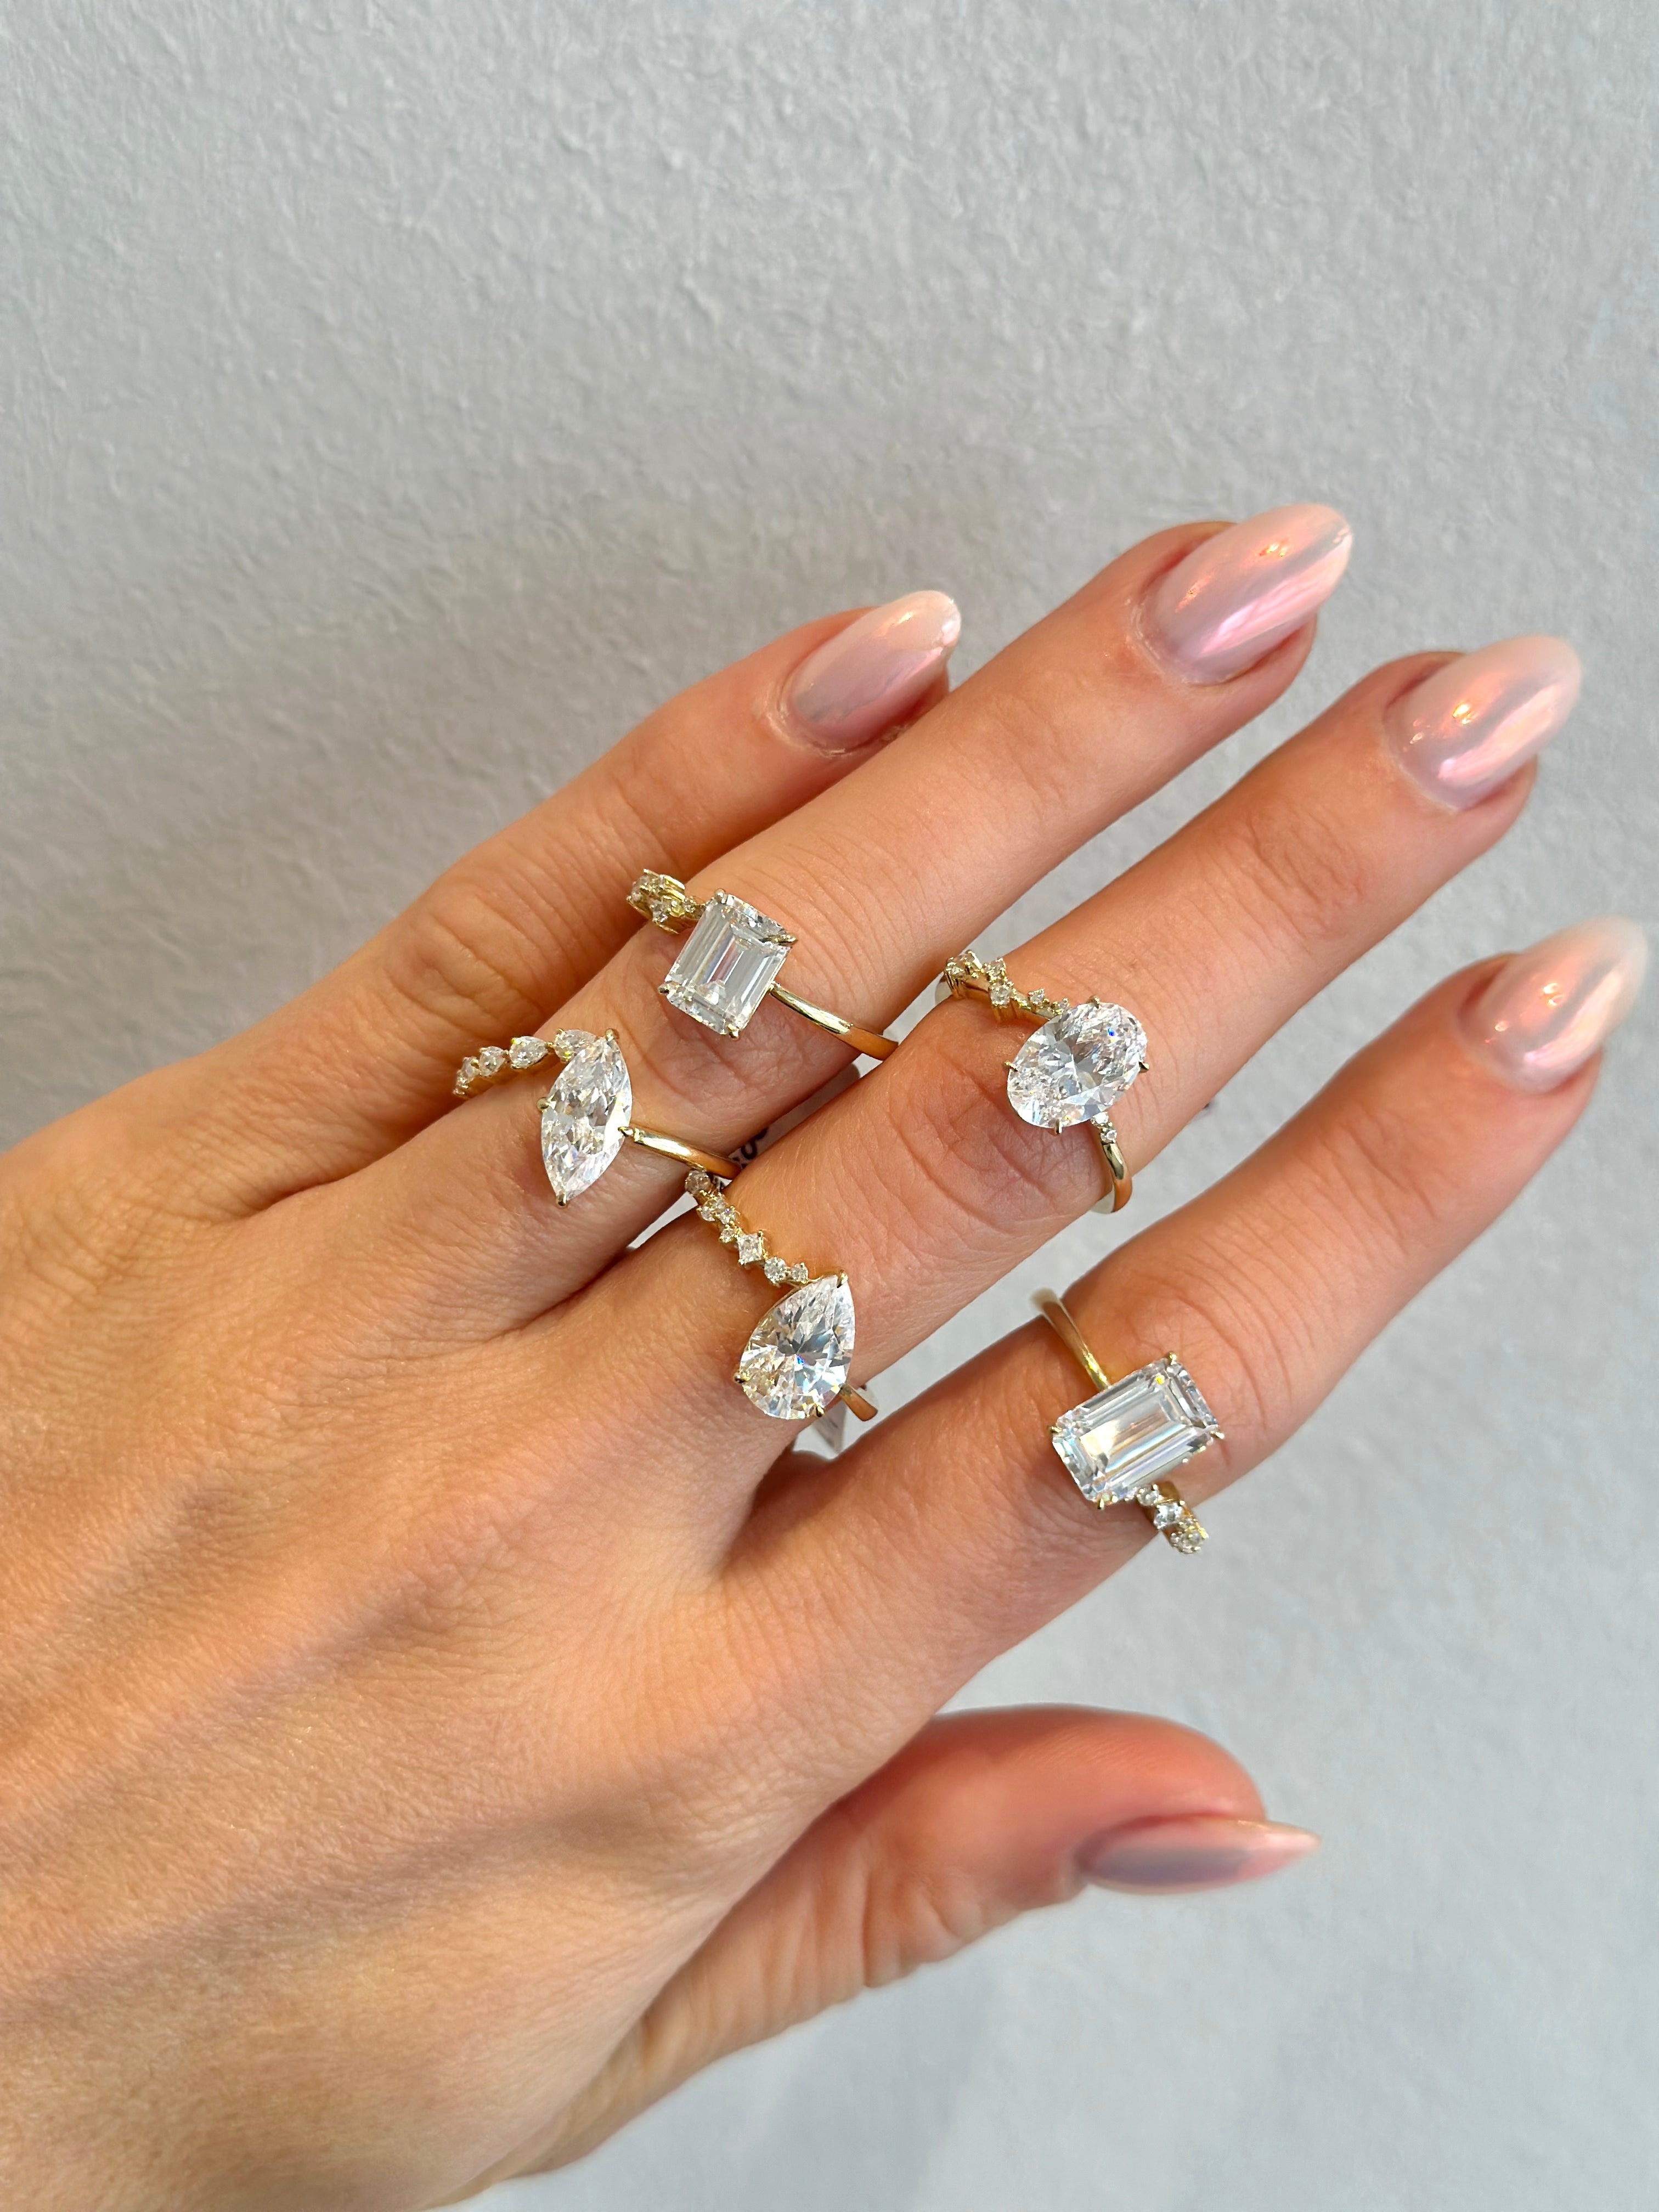 engagement rings on hand